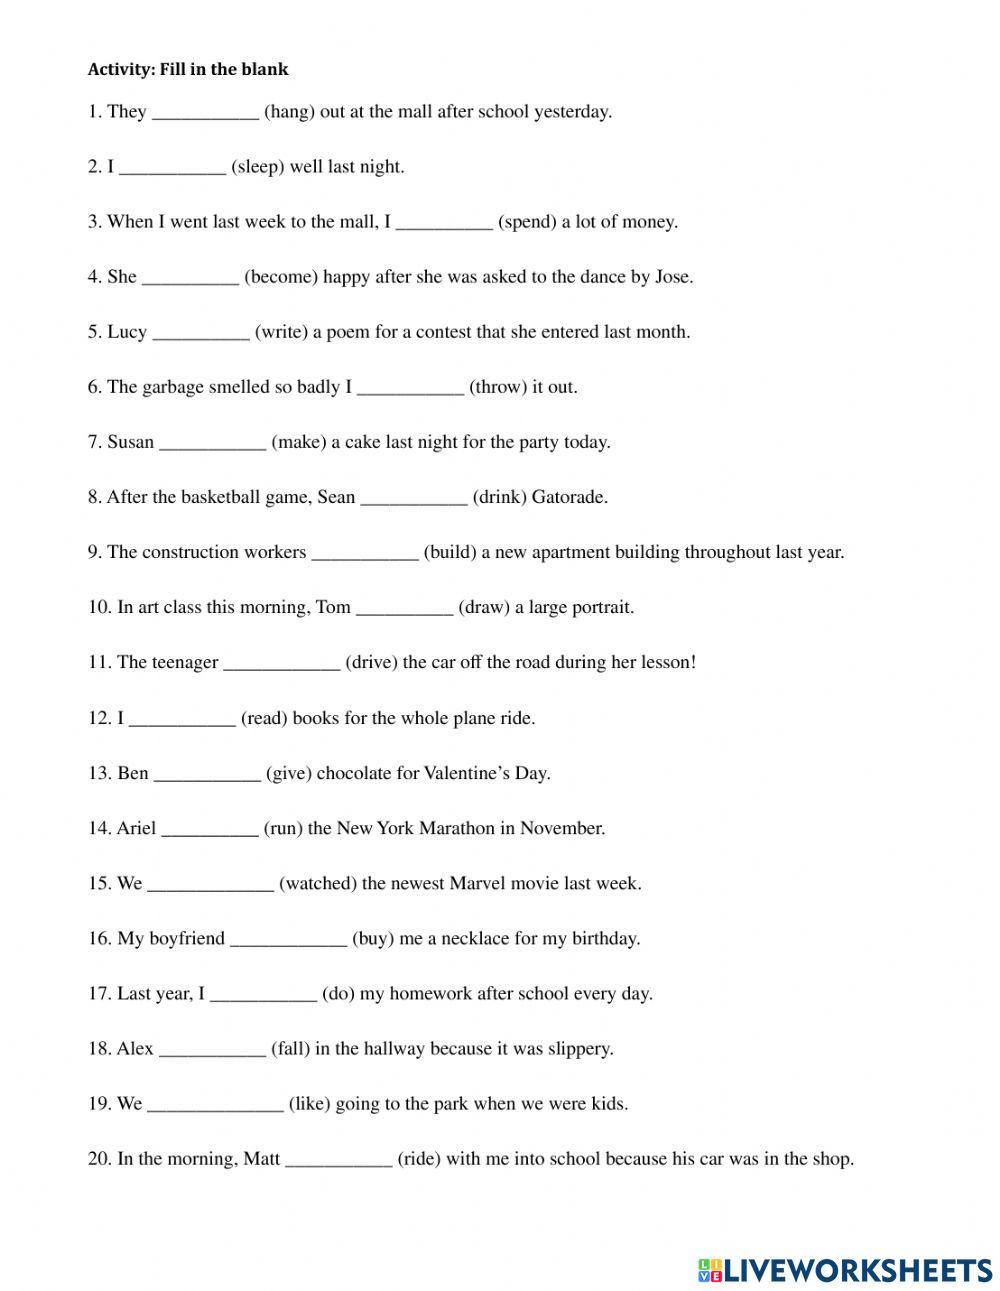 Past tense practice online exercise | Live Worksheets